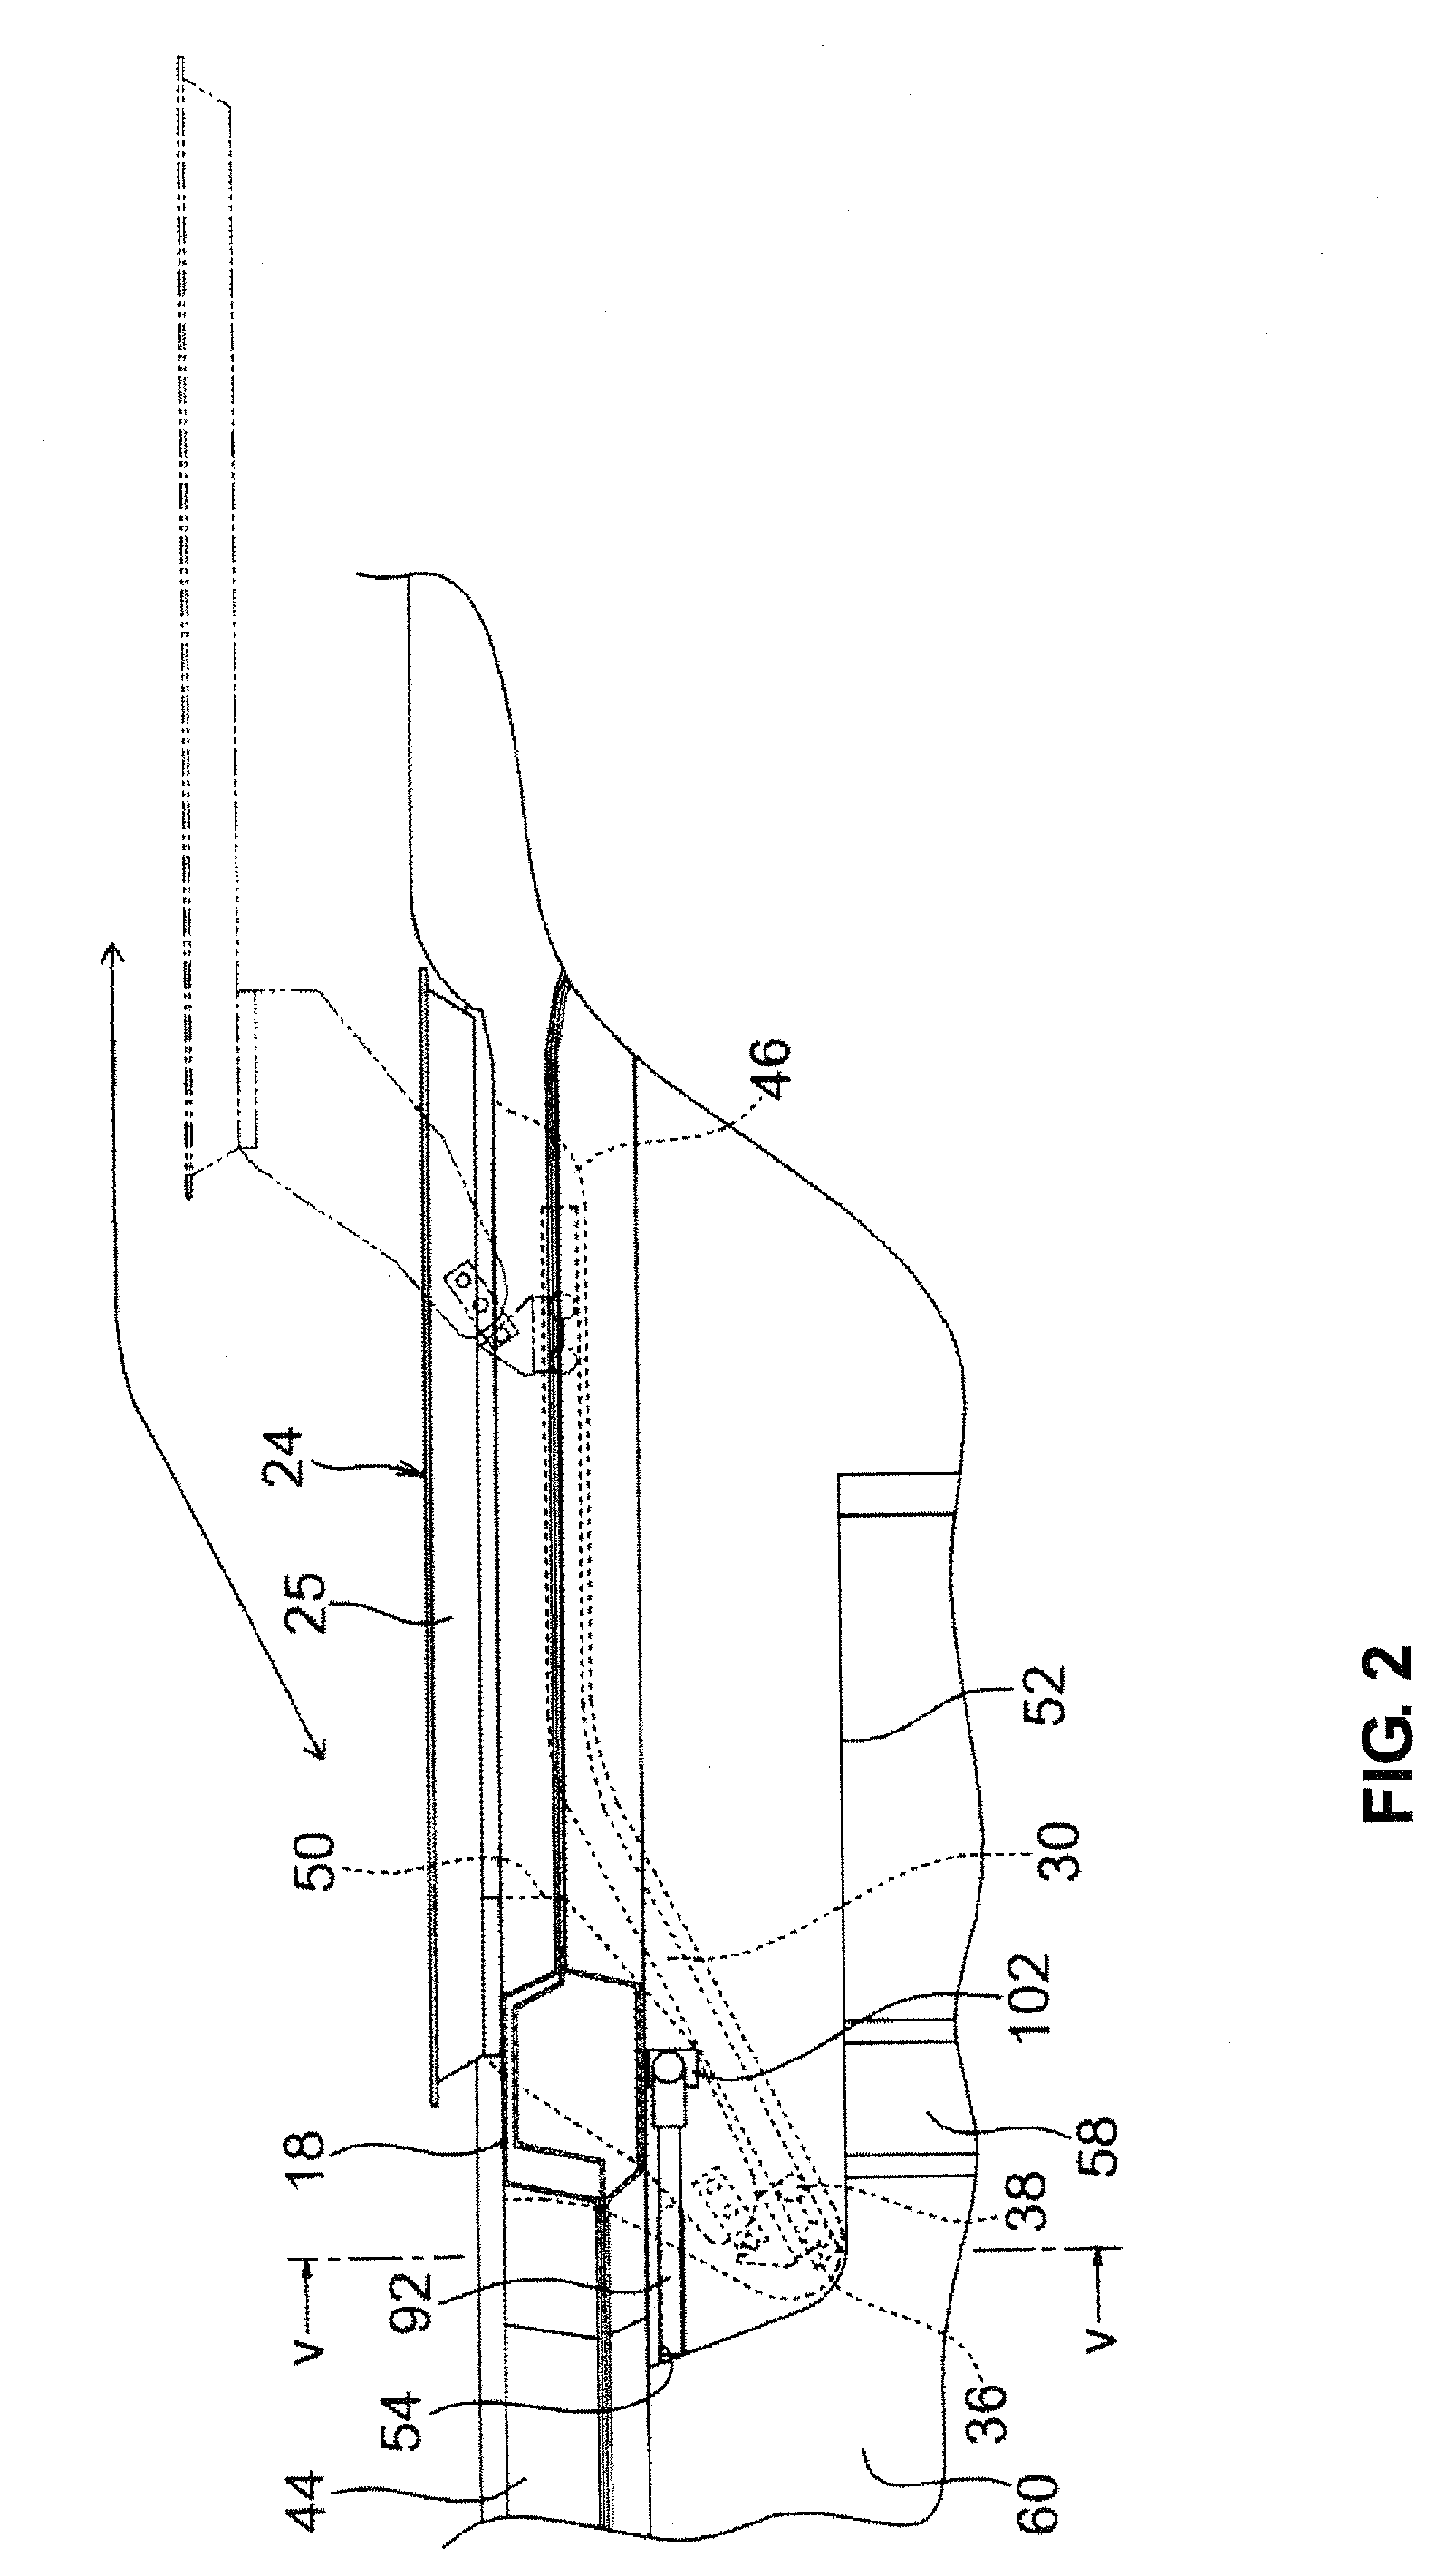 Occupant protection device of vehicle